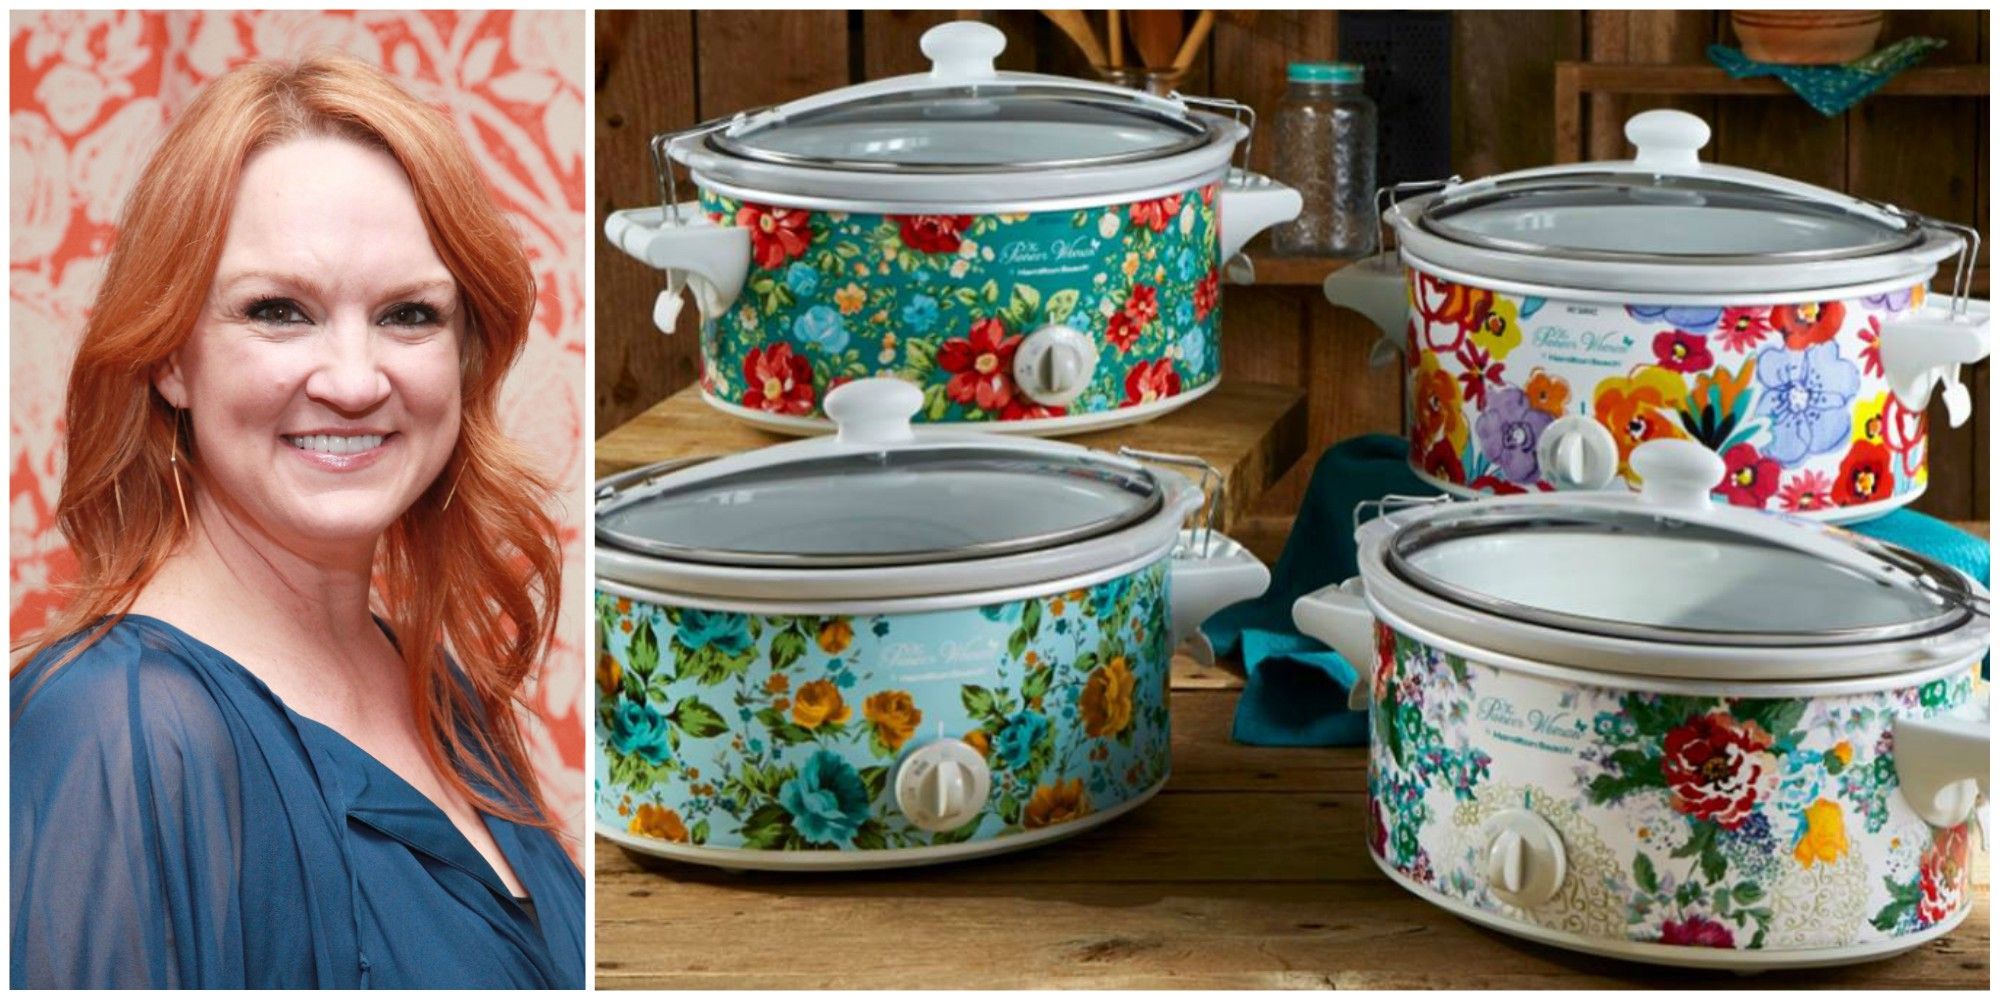 The Pioneer Woman Quietly Dropped A New Slow Cooker Design And It Is  Adorable